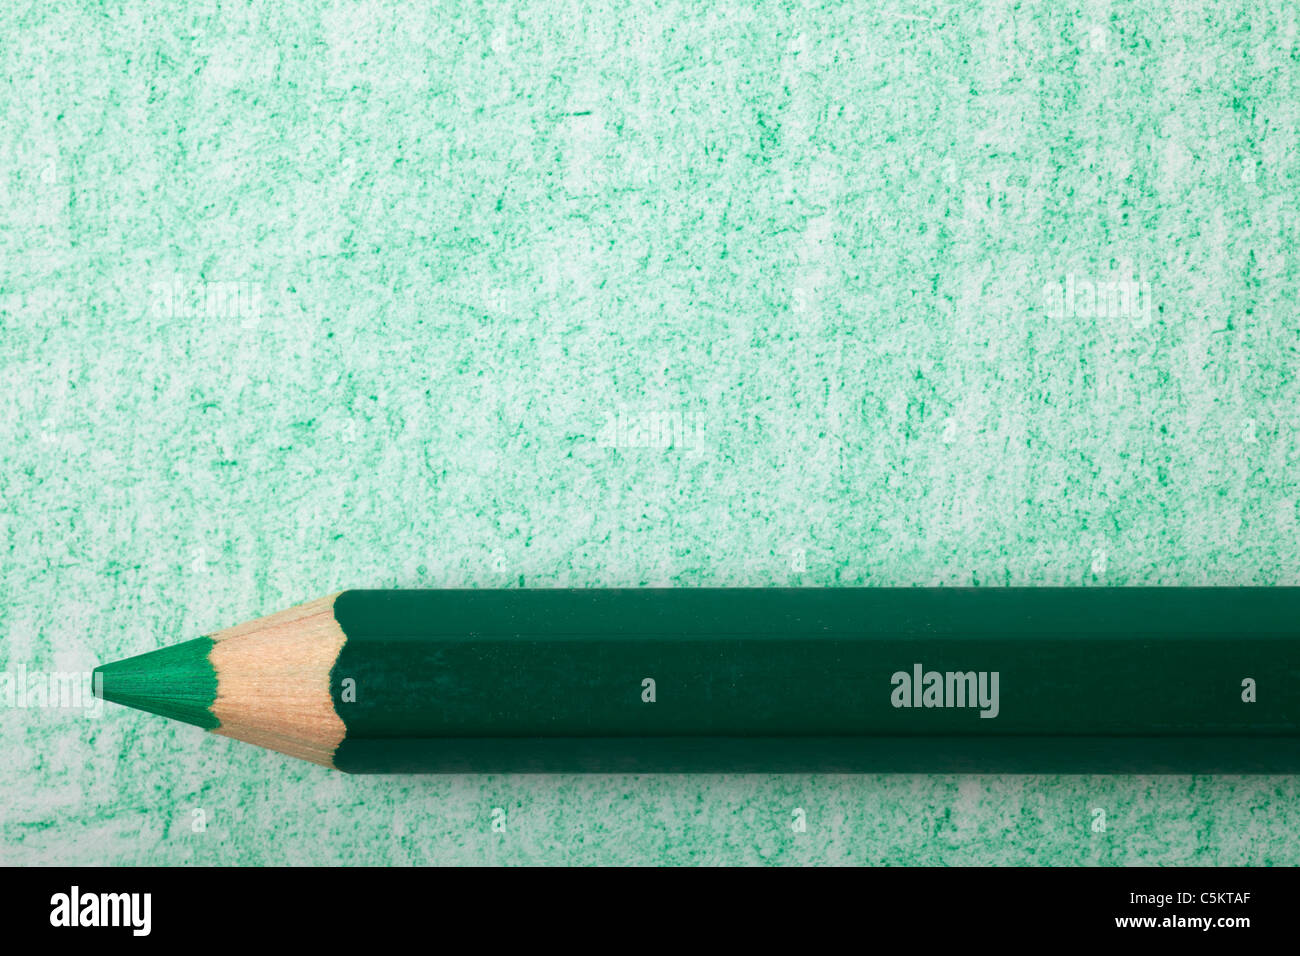 Green color pencil with coloring on a piece of paper Stock Photo